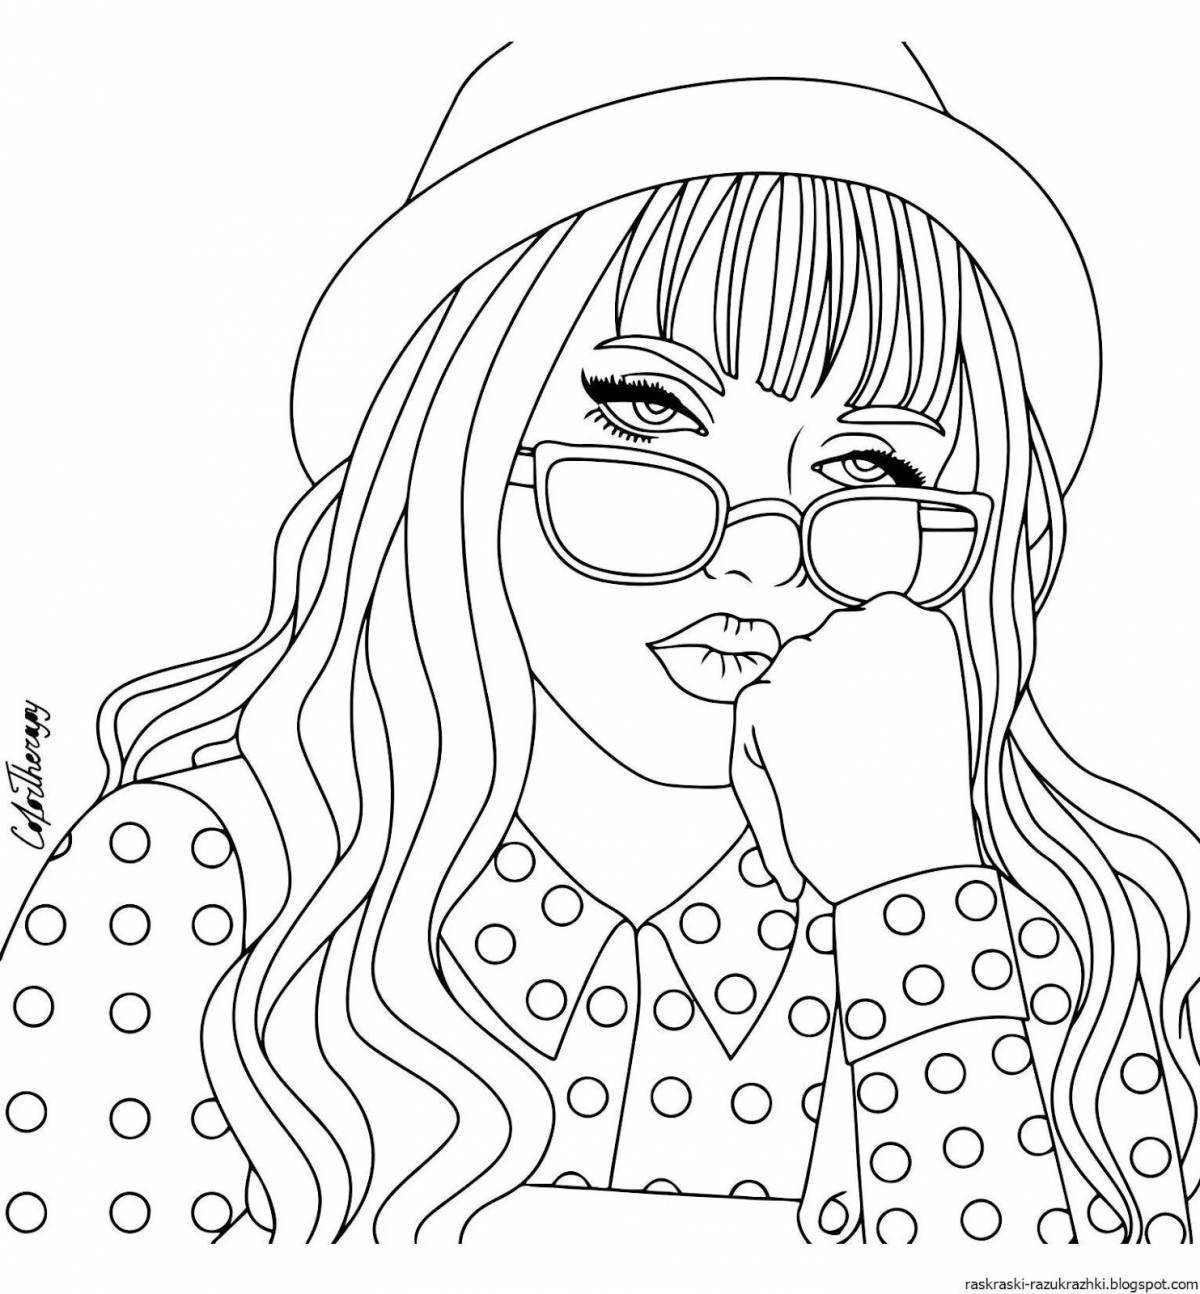 Clear coloring page from photo